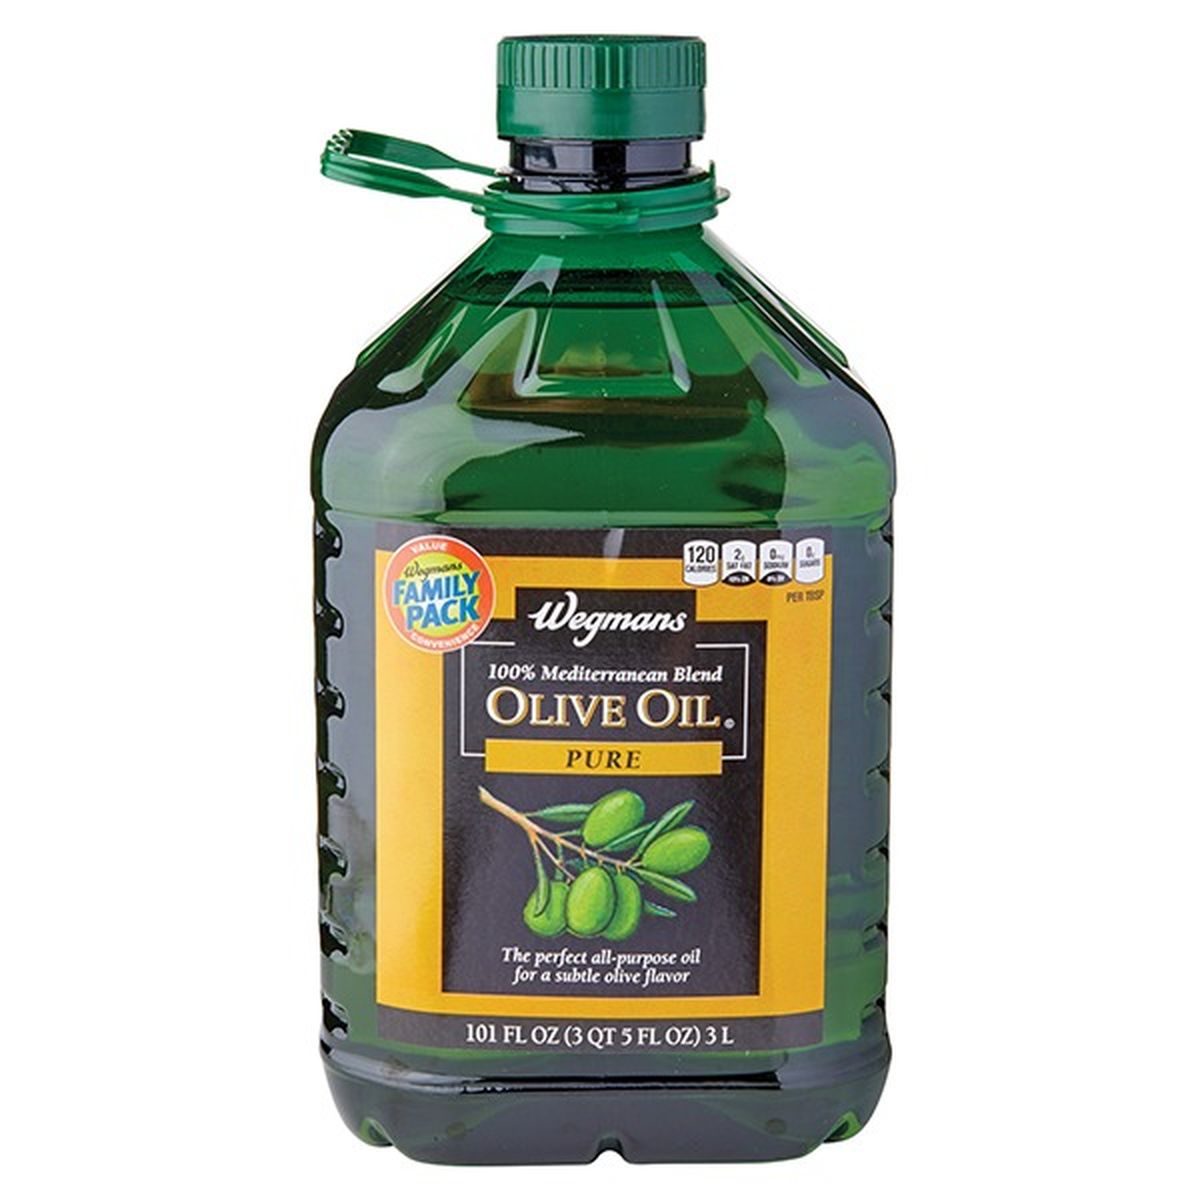 Calories in Wegmans Pure Olive Oil, FAMILY PACK